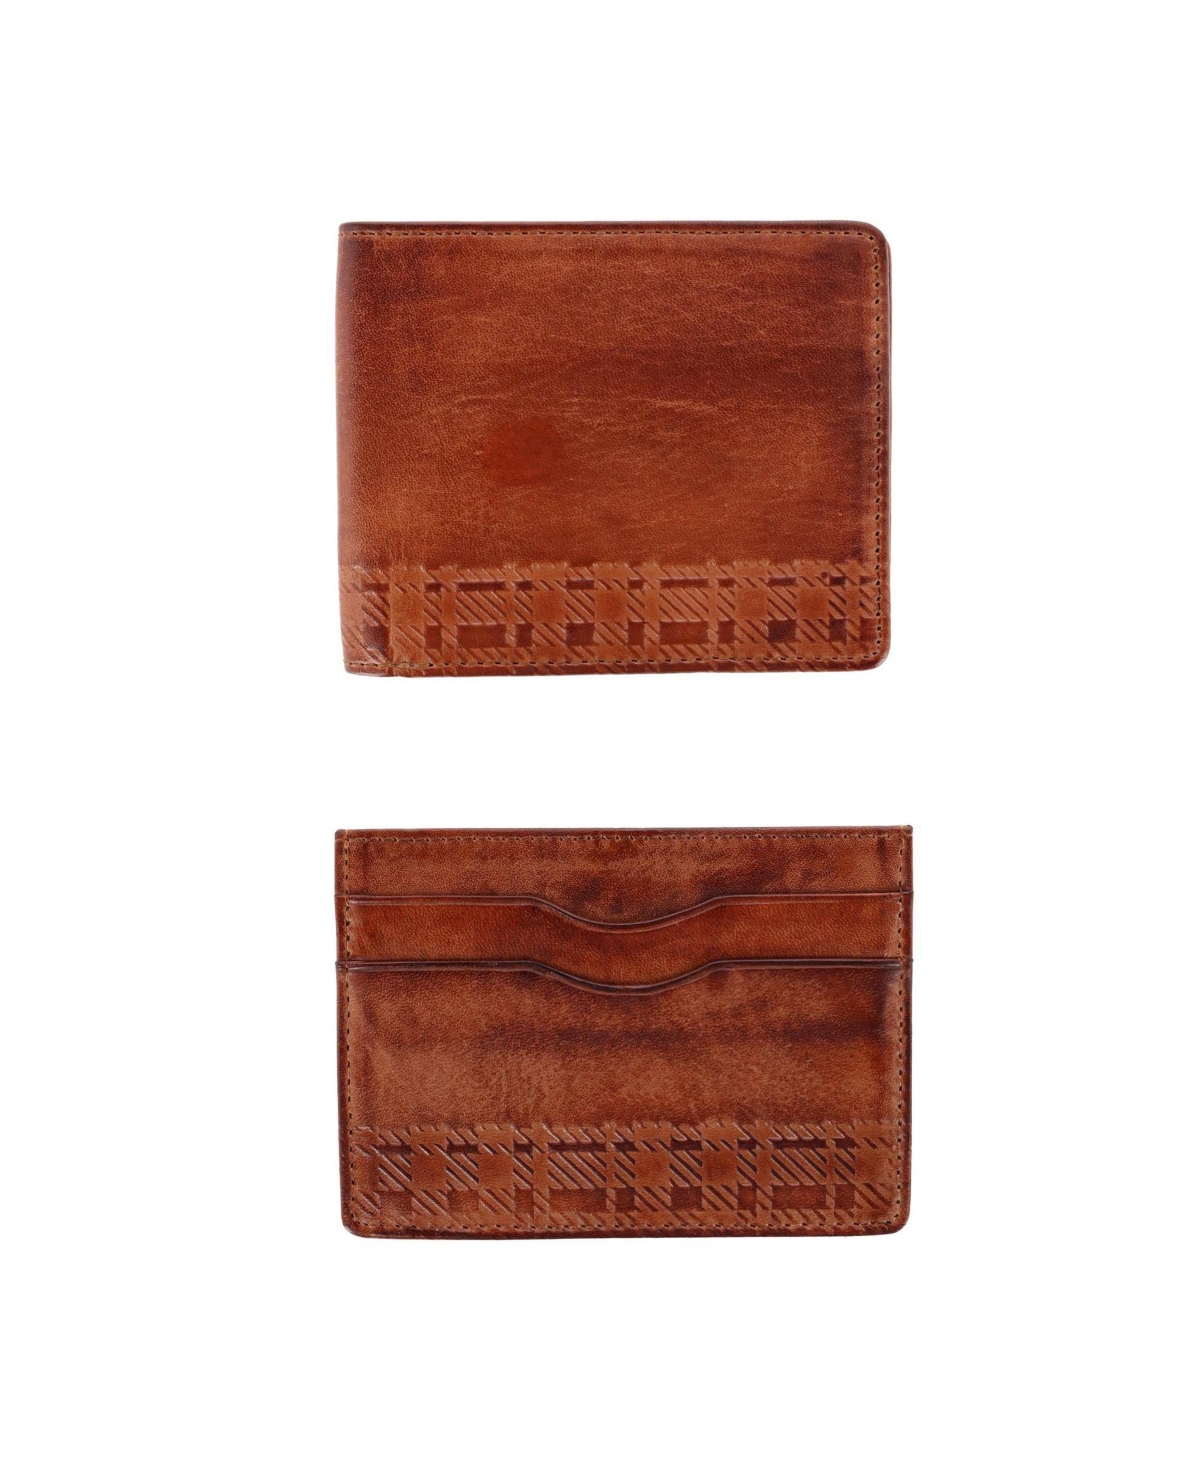 Caelen Plaid Embossed Bi-Fold Wallet and Card Case Combo - Cognac